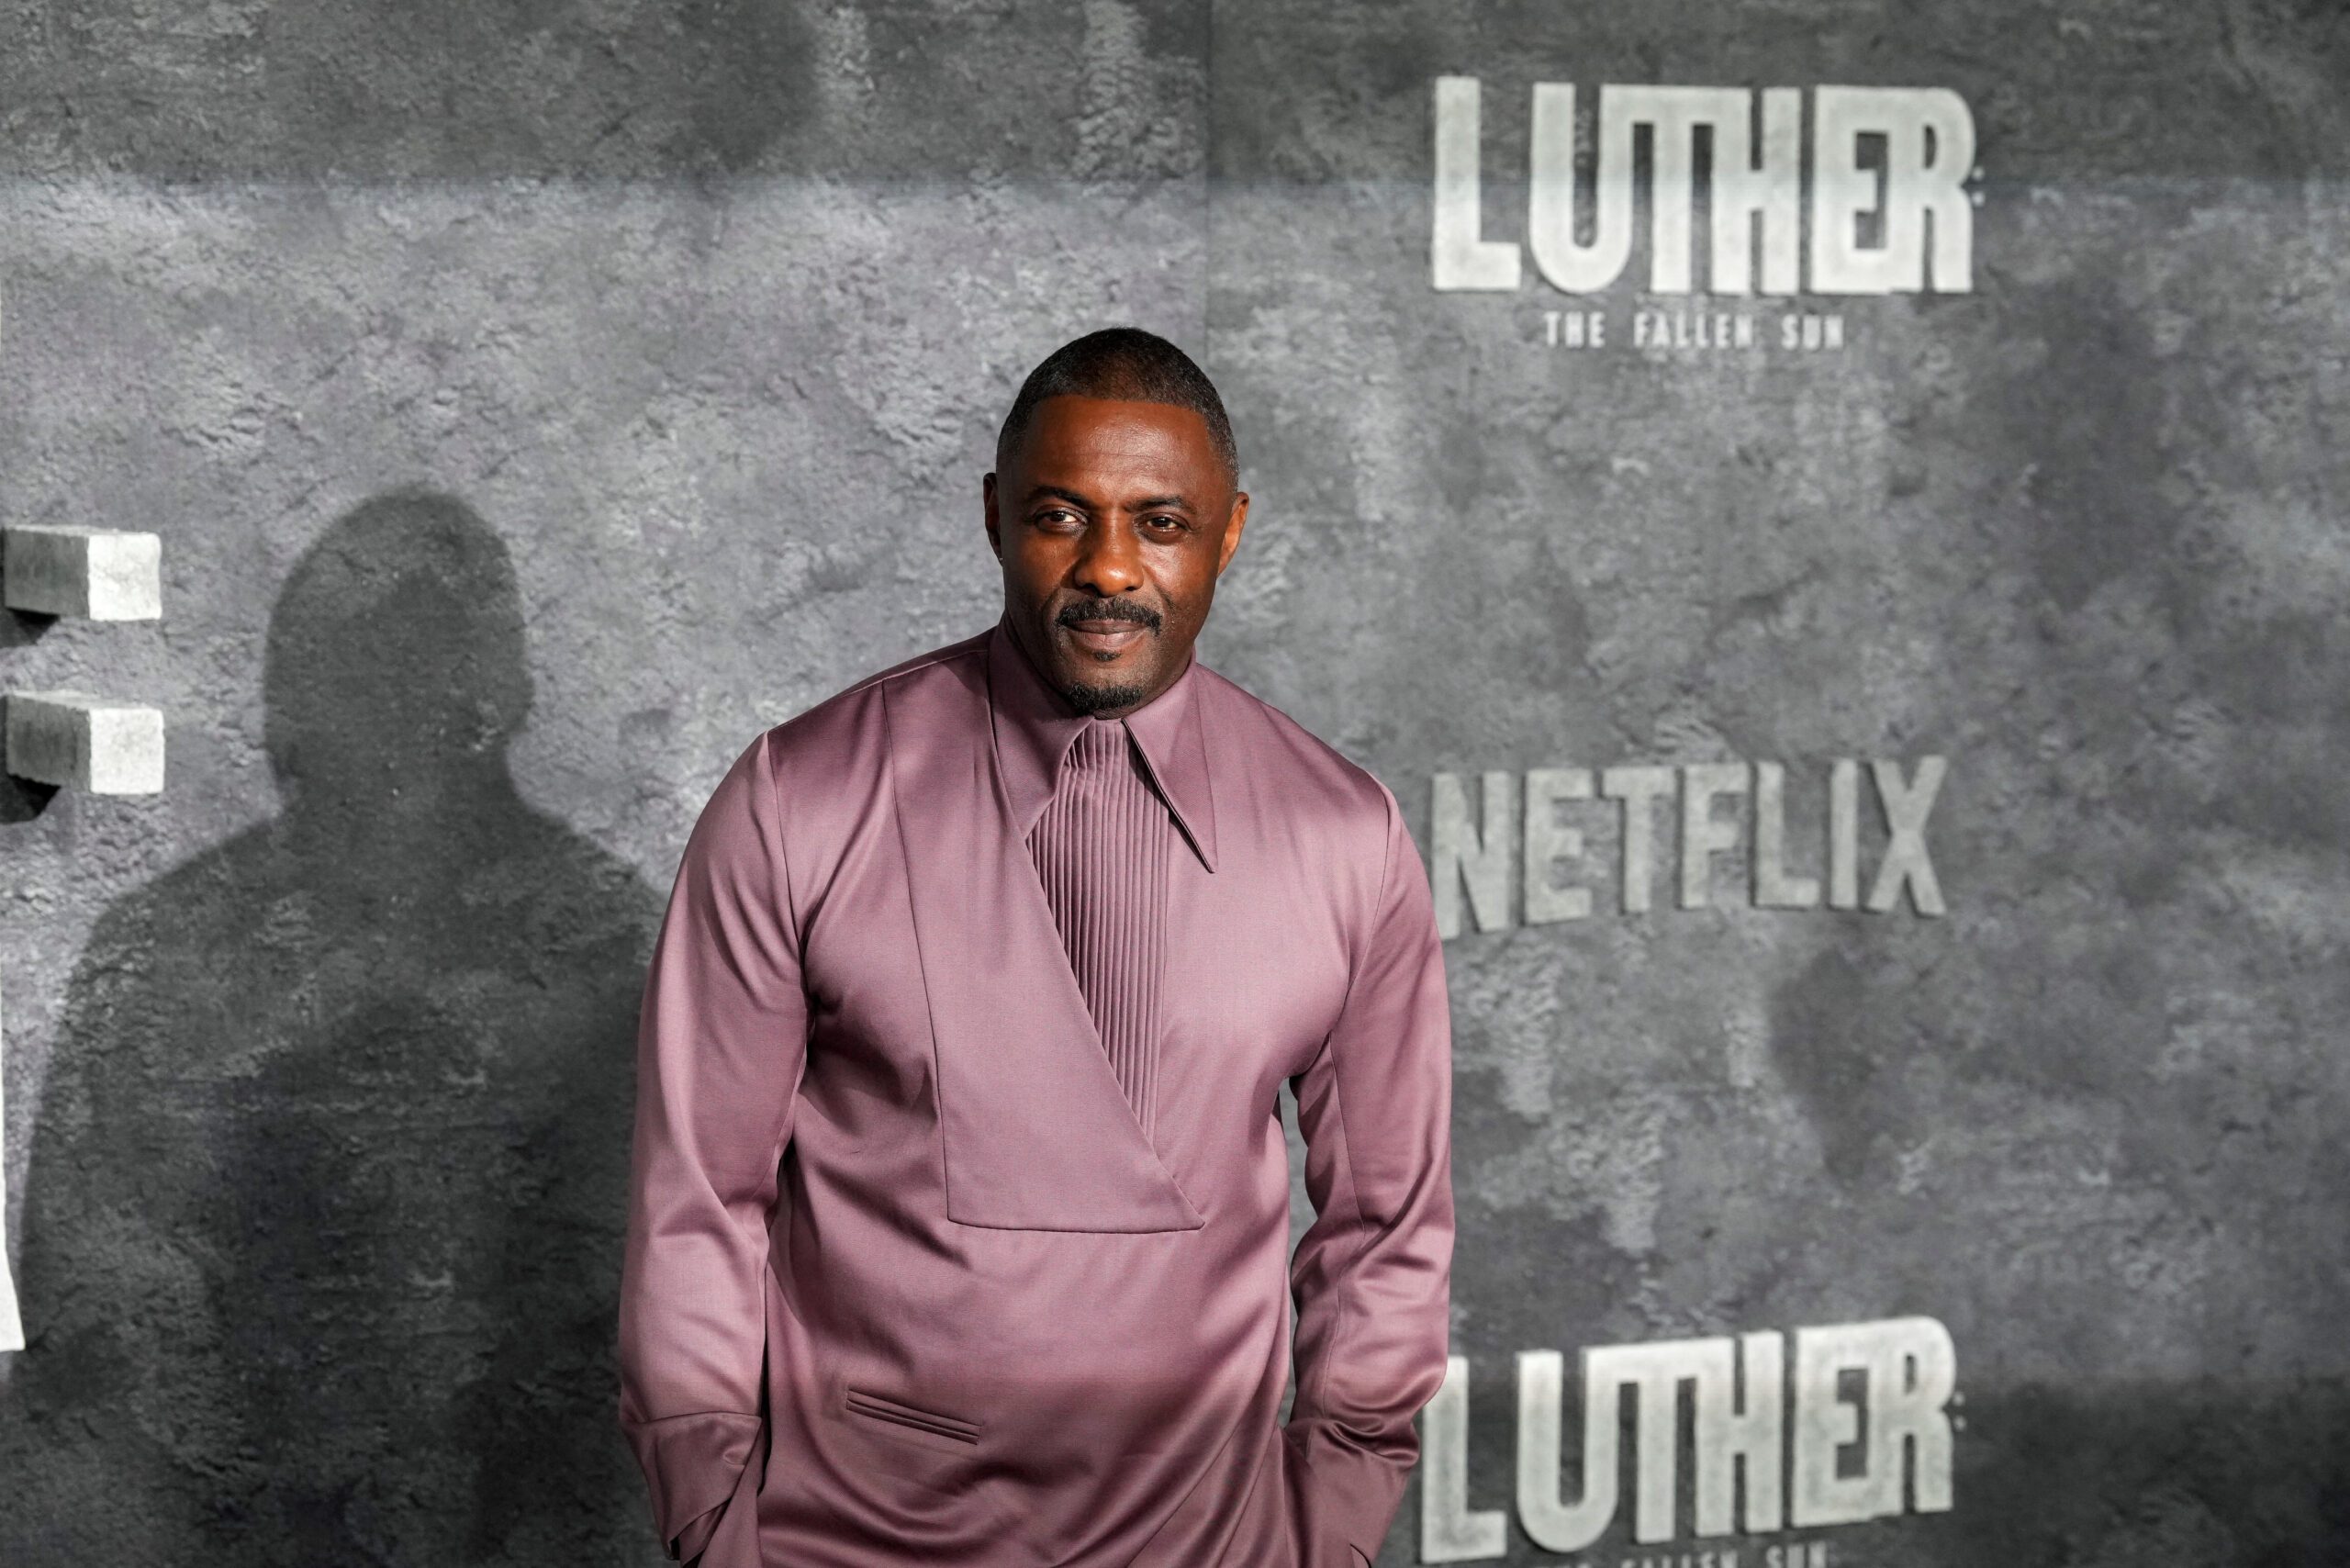 Idris Elba premieres ‘Luther’ film, says he hopes for more